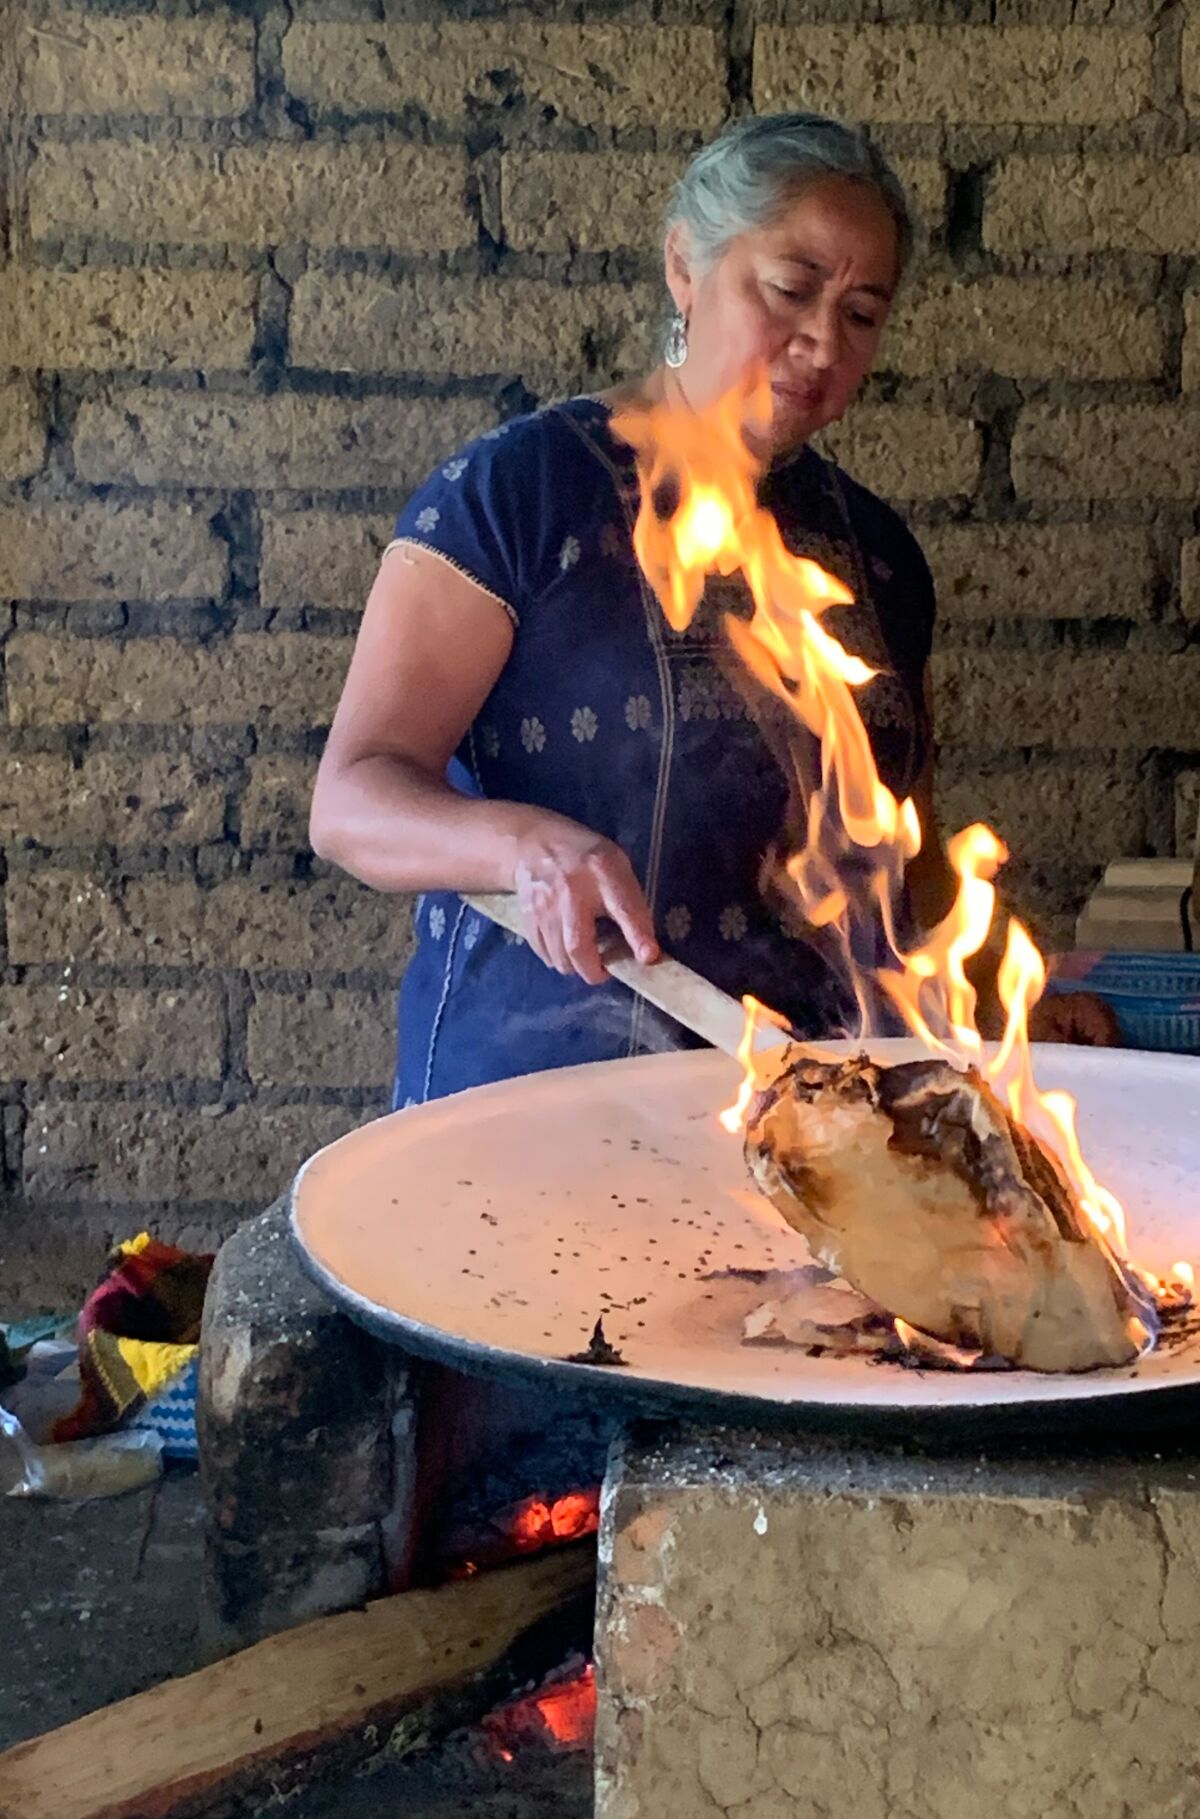 A woman roasts food in a comal.